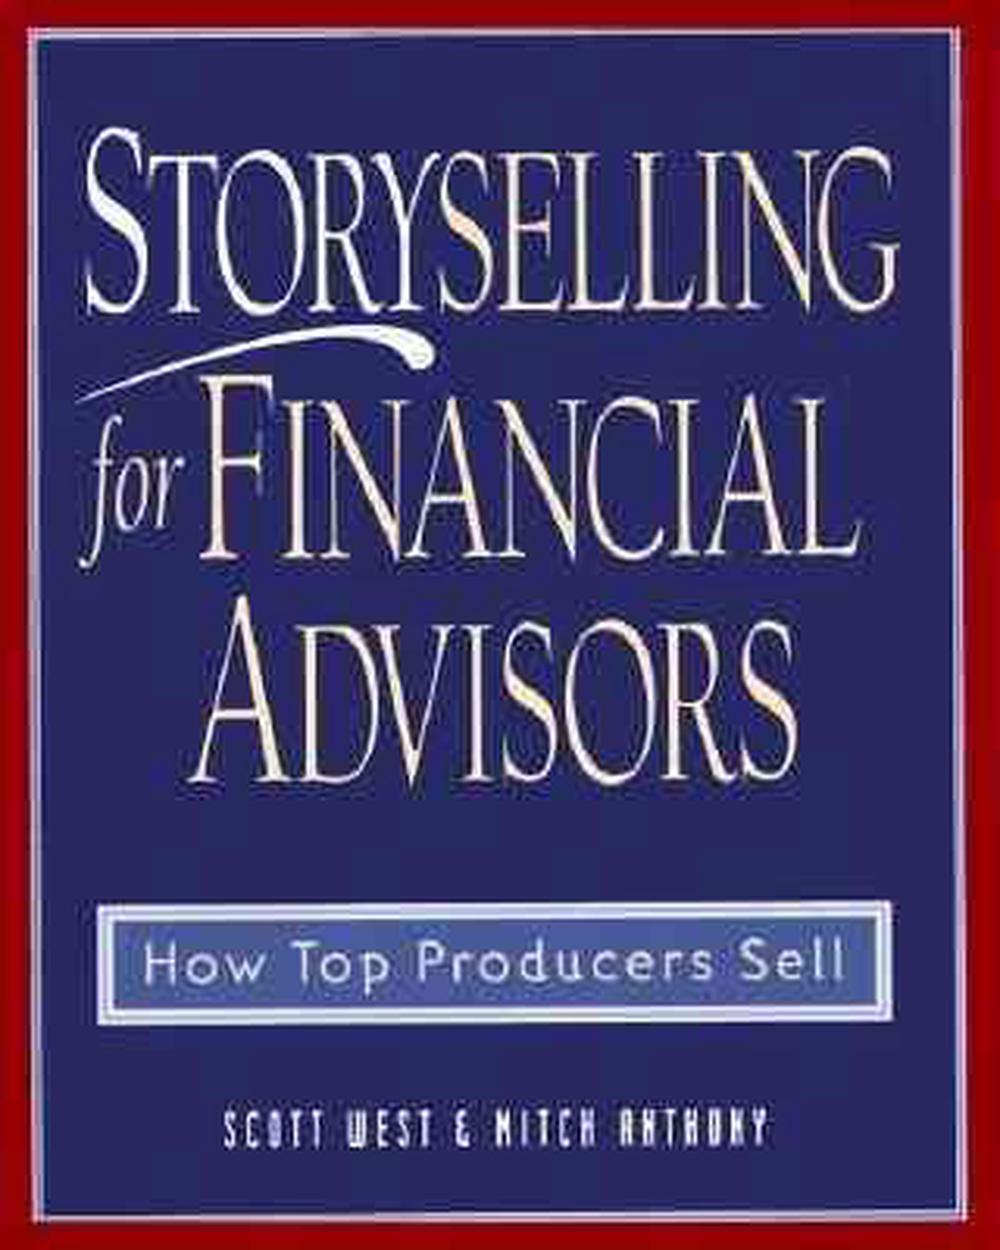 Storyselling for Financial Advisors How Top Producers Sell by Scott